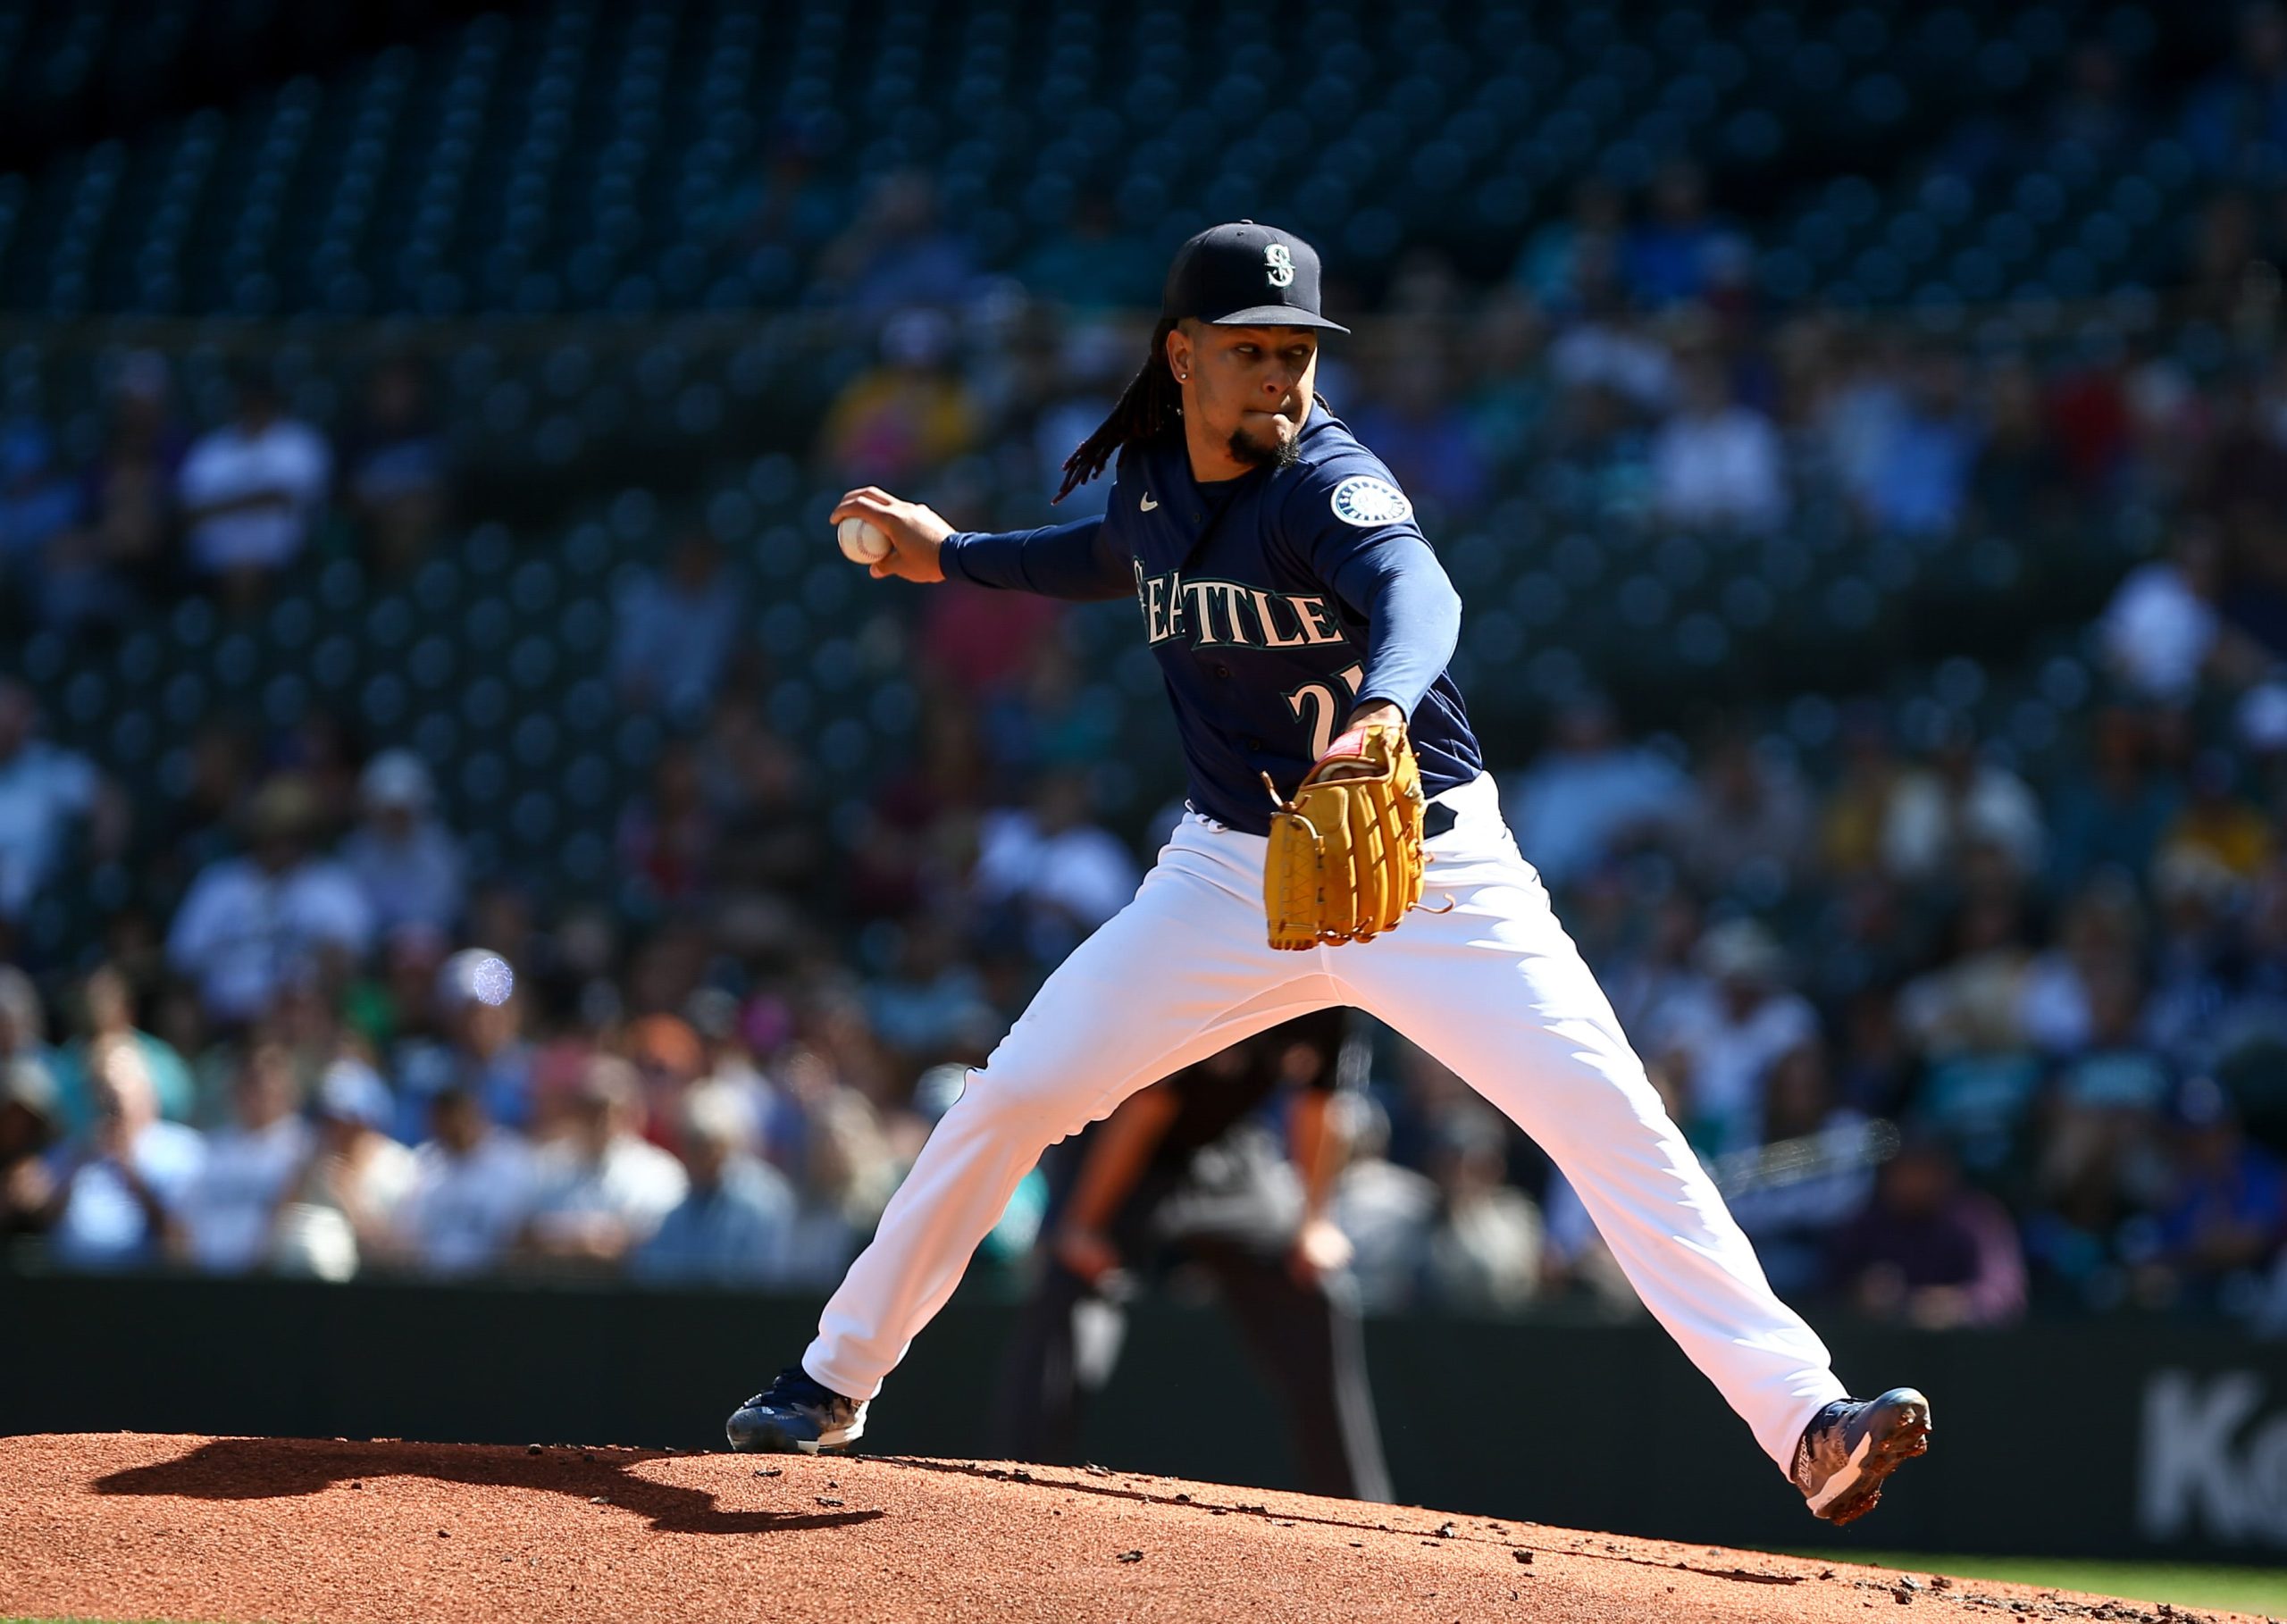 MLB Tuesday parlay at mega (+910 odds): Mariners take care of business